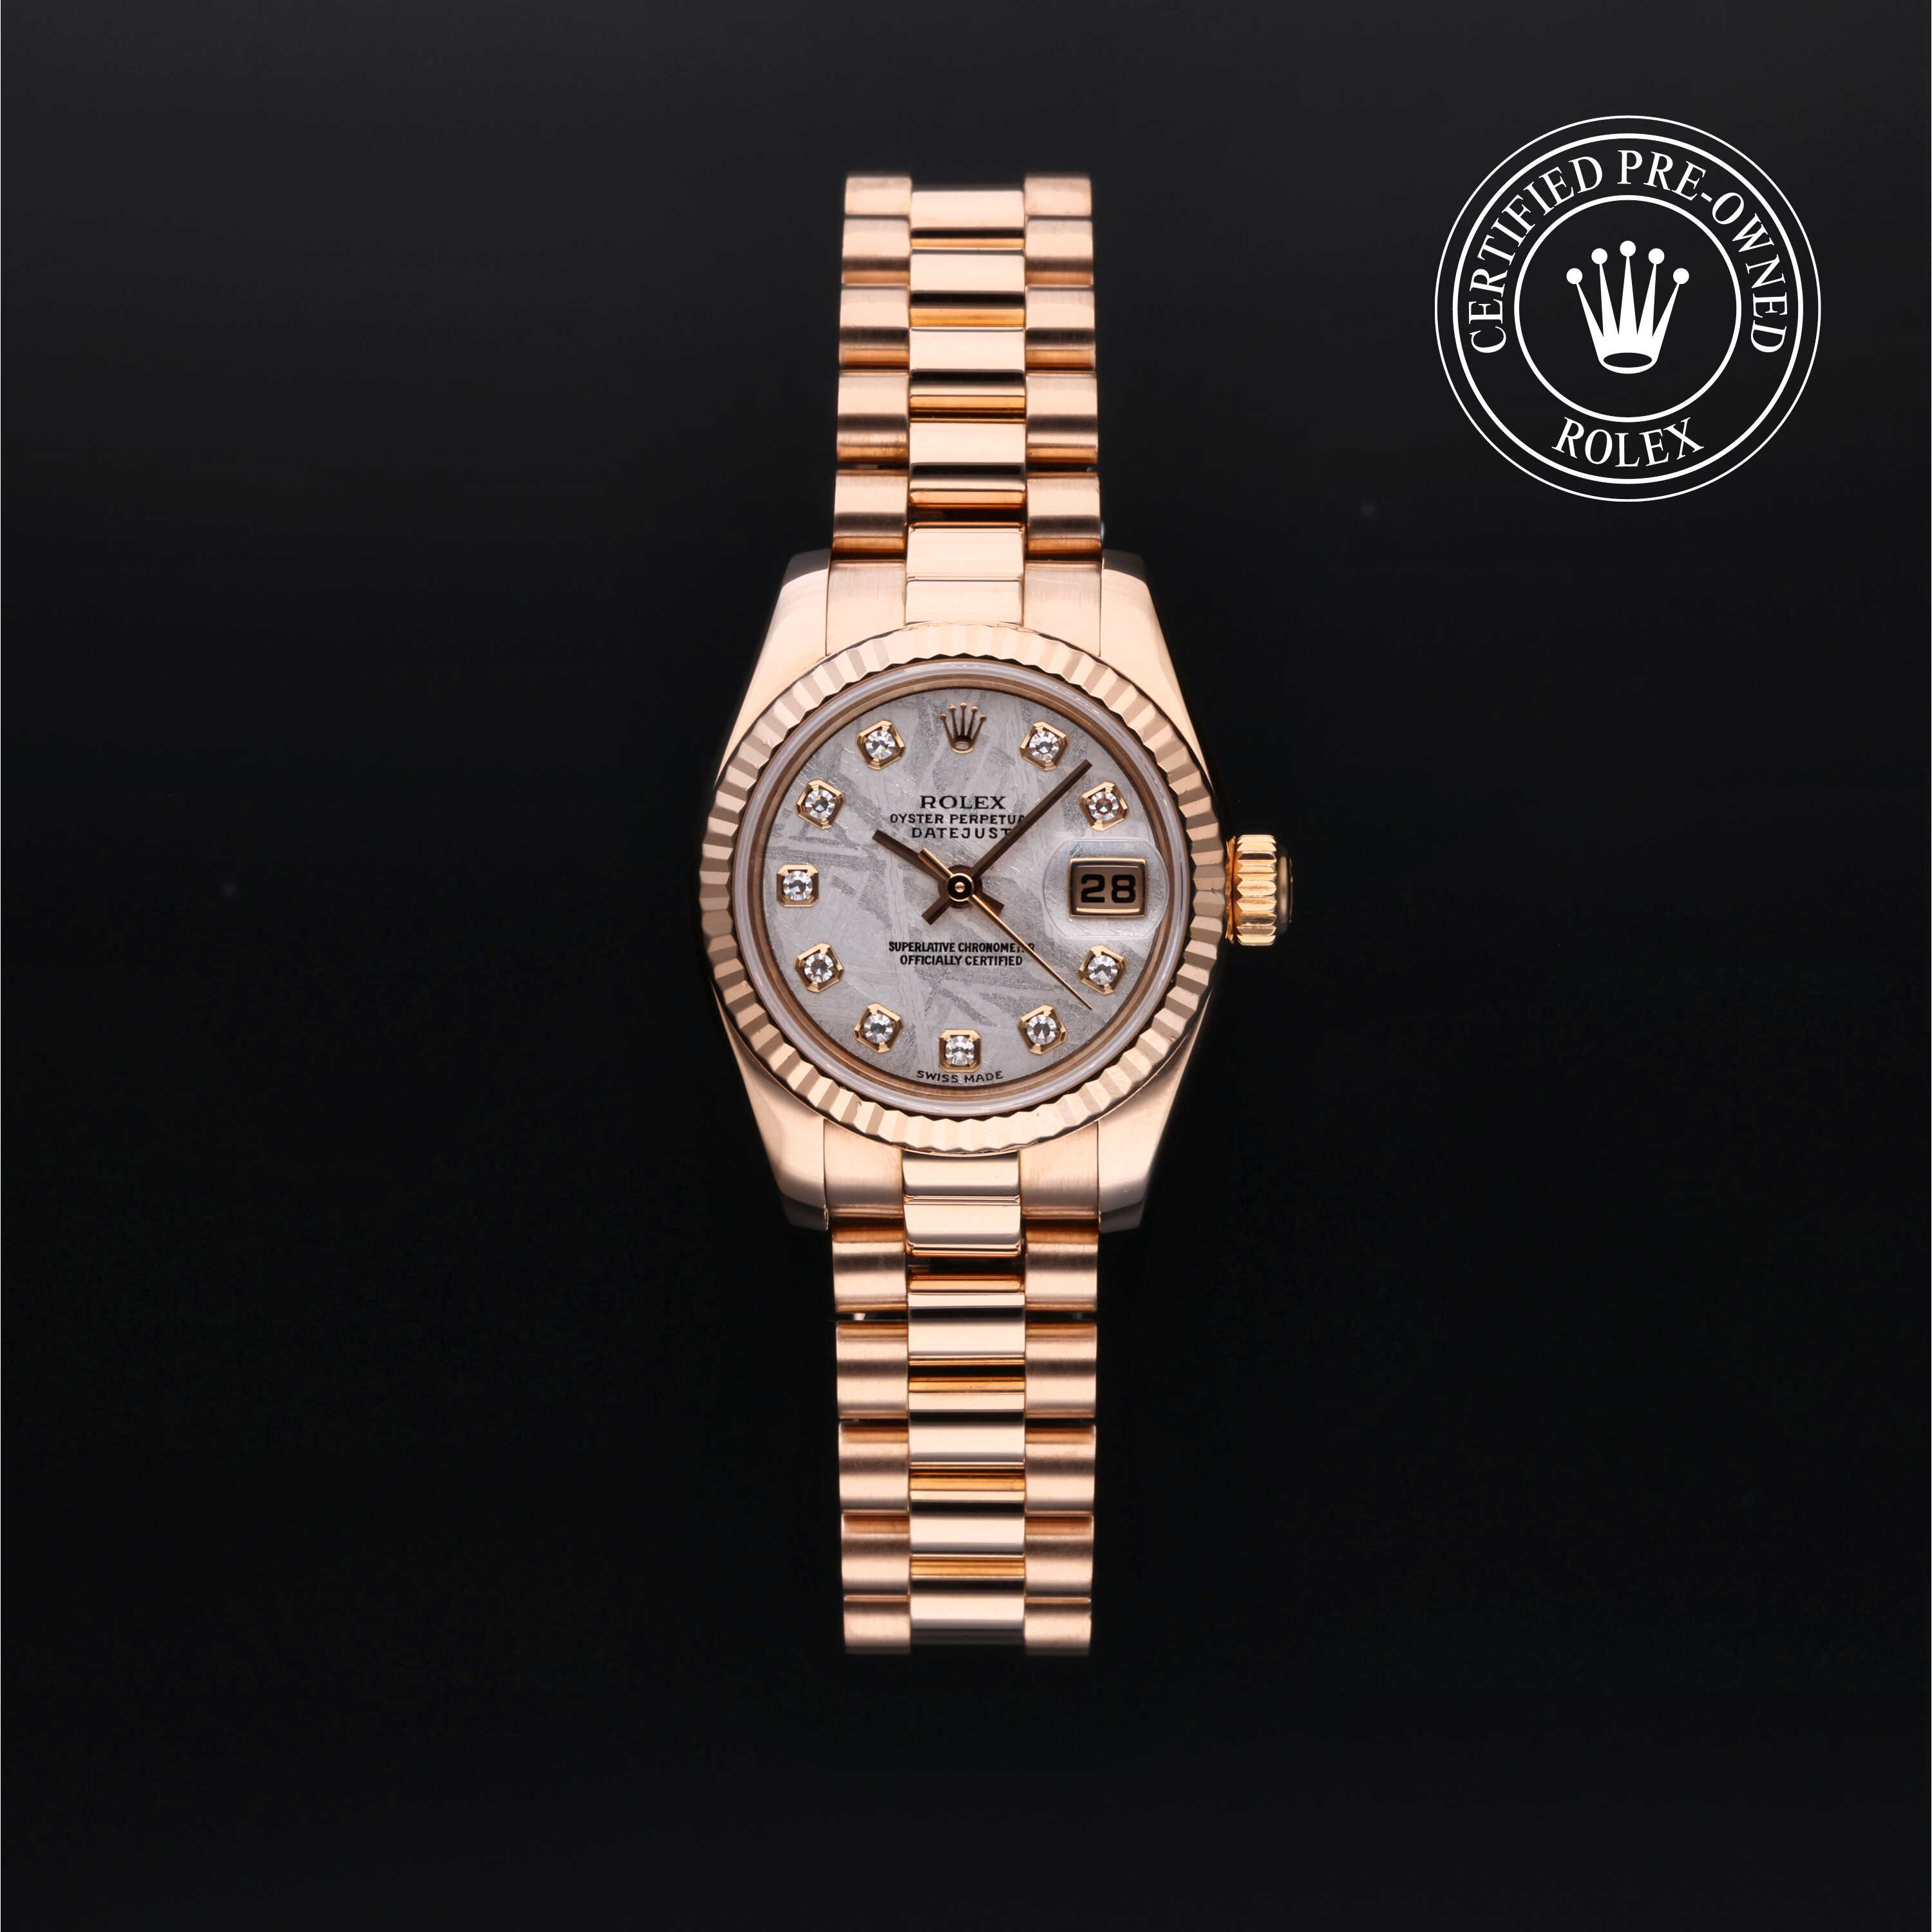 Rolex Certified Pre-Owned Watches | Liljenquist & Beckstead Jewelers